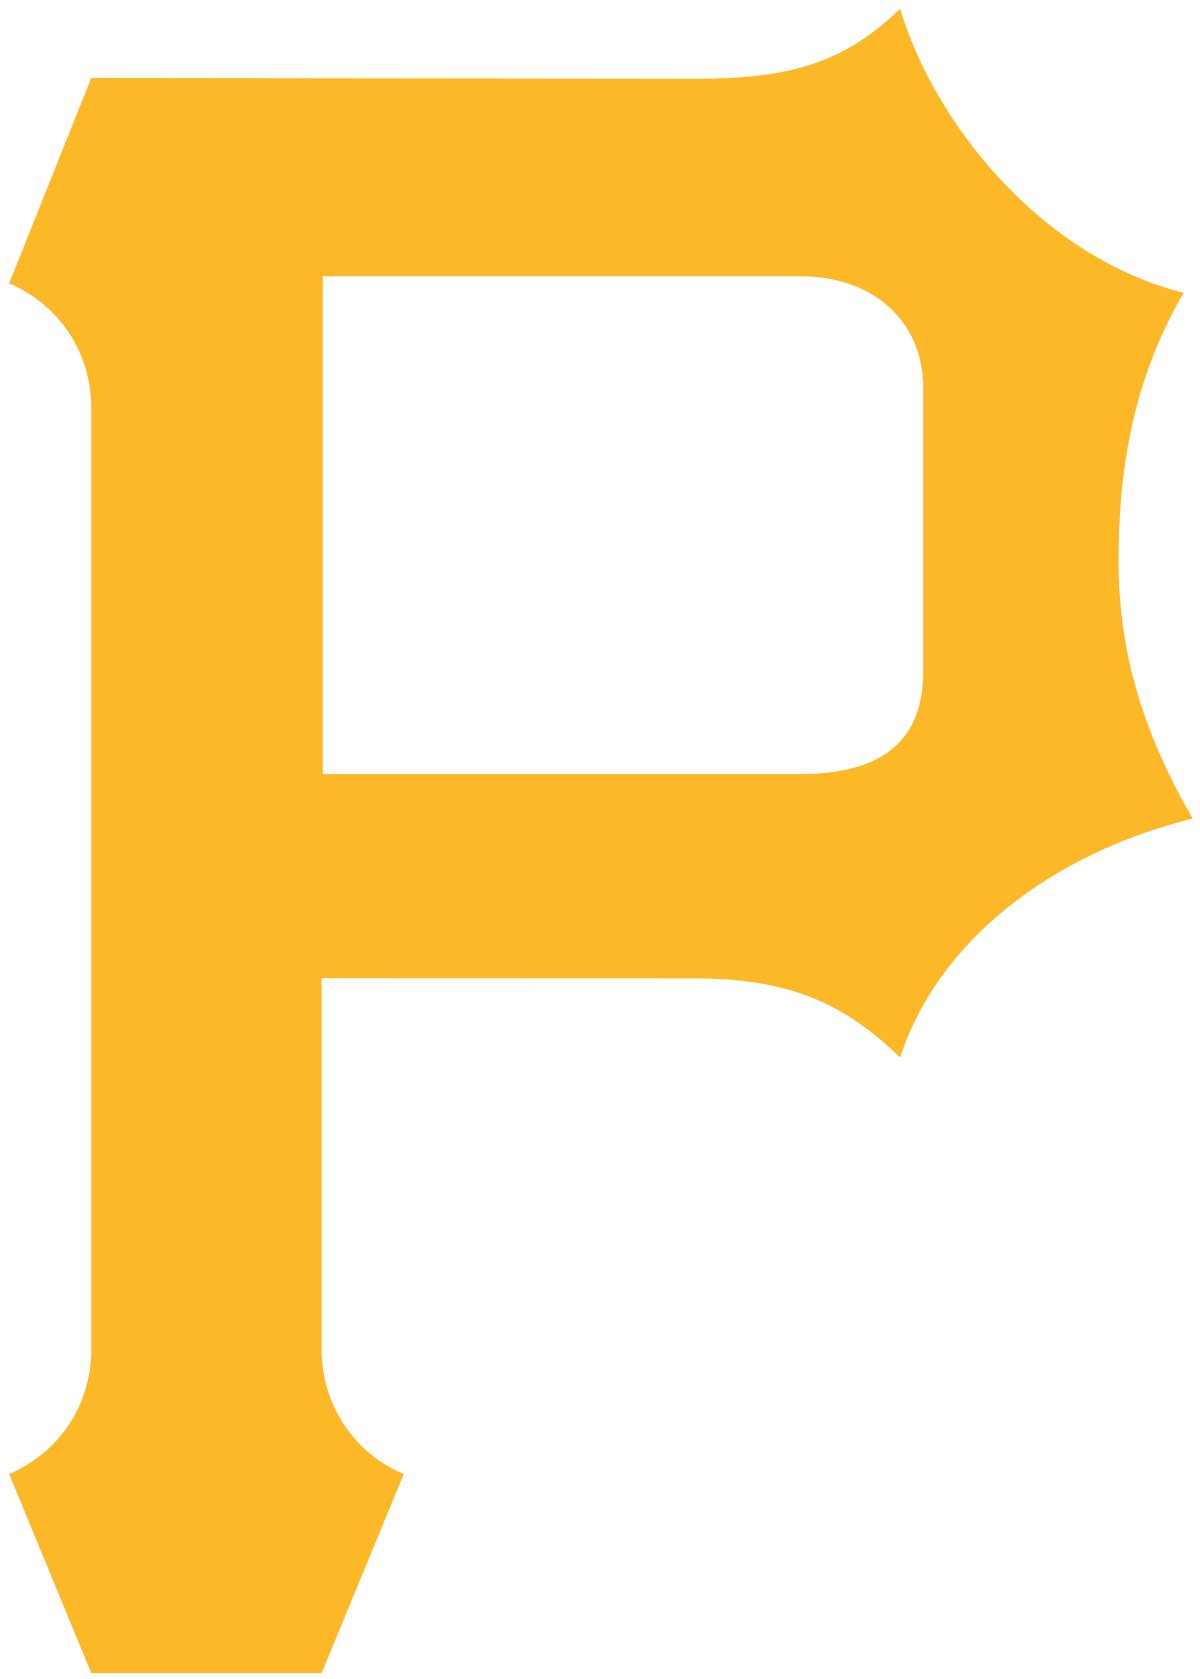 Pittsburgh Pirates on X: Proud to wear these colors.